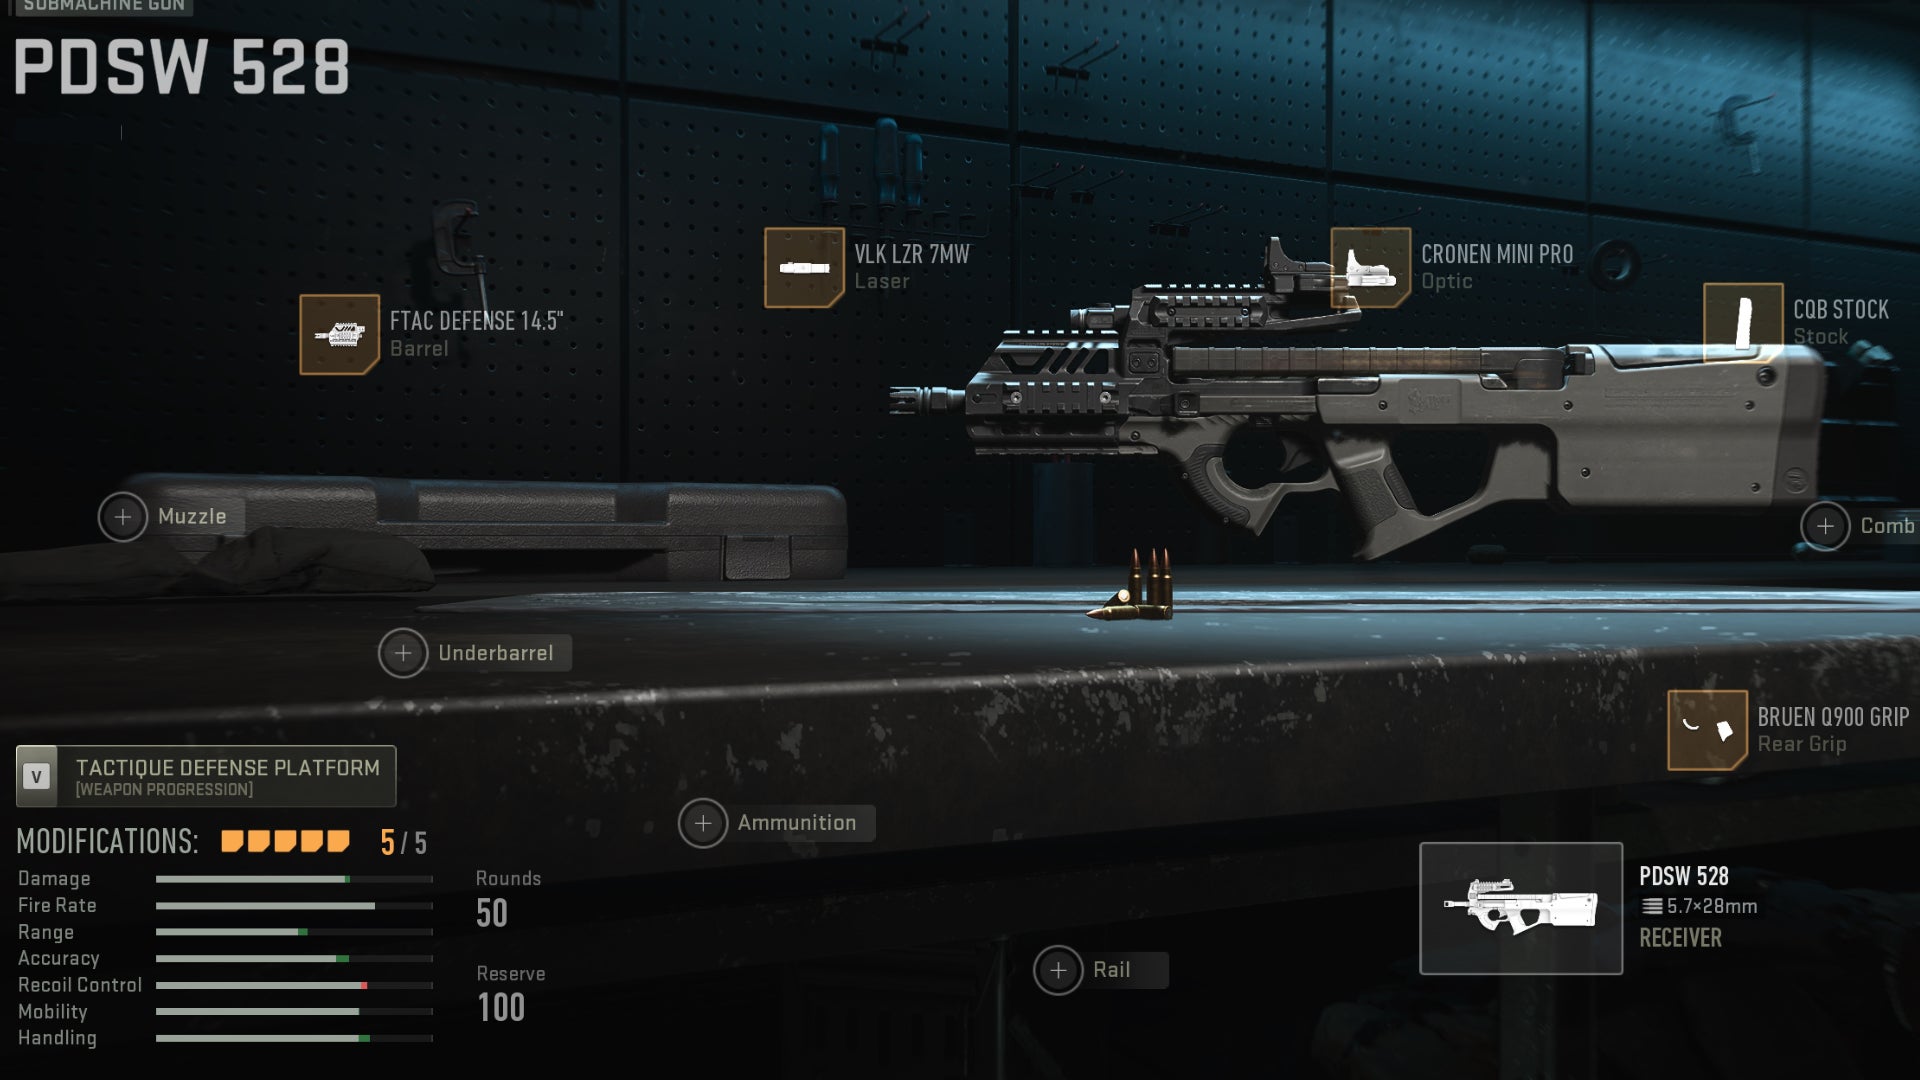 The PDSW 528 in the Warzone 2 Gunsmith screen, with all the attachments for the best loadout applied.